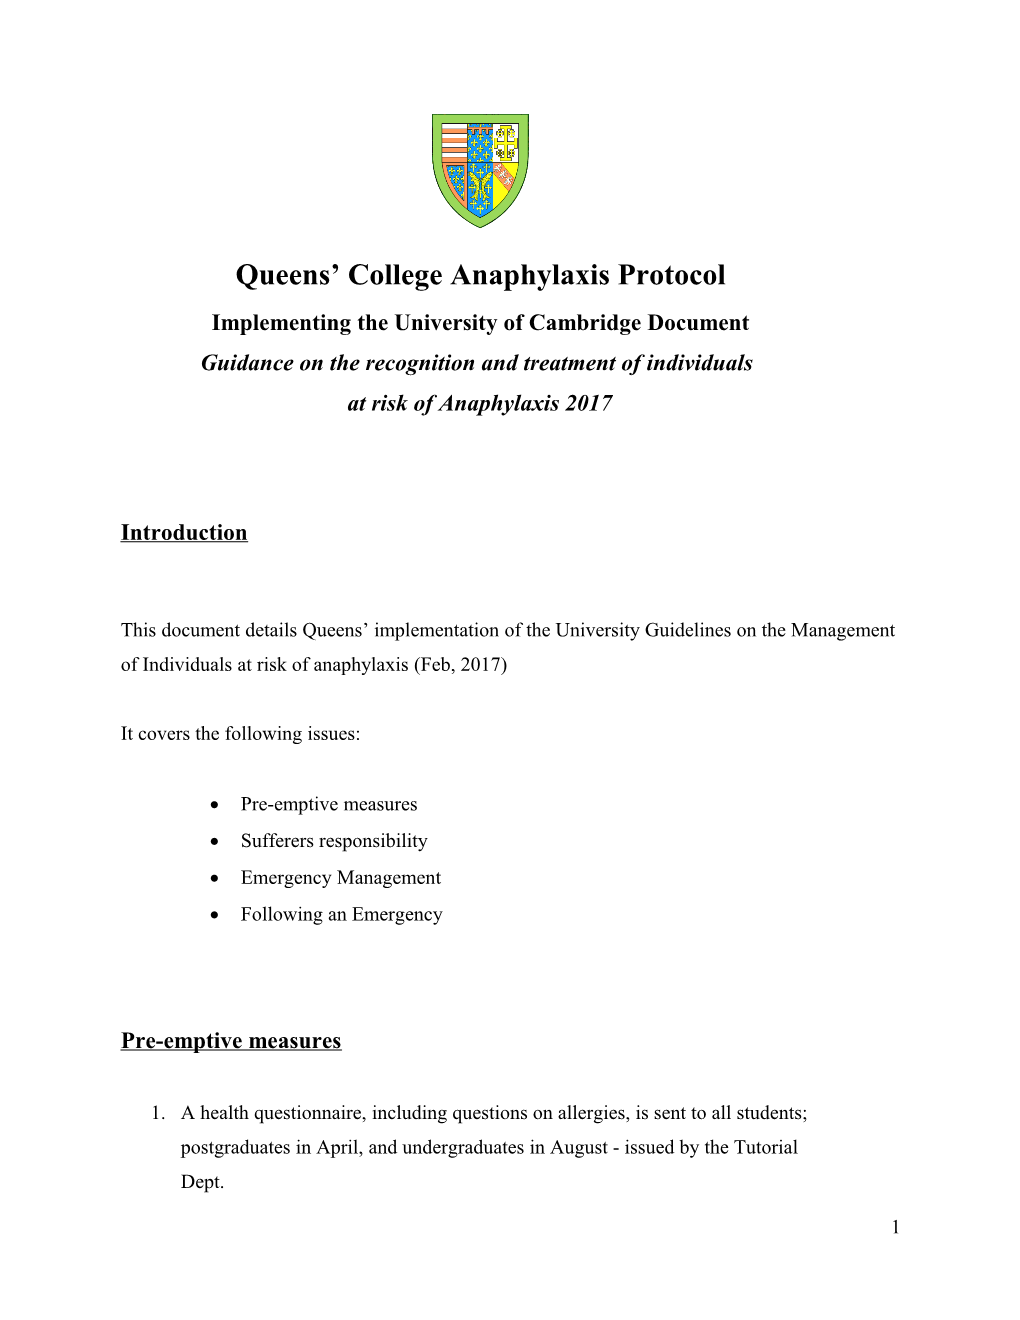 The Implementation of the University of Cambridge Guidelines on the Management of Students